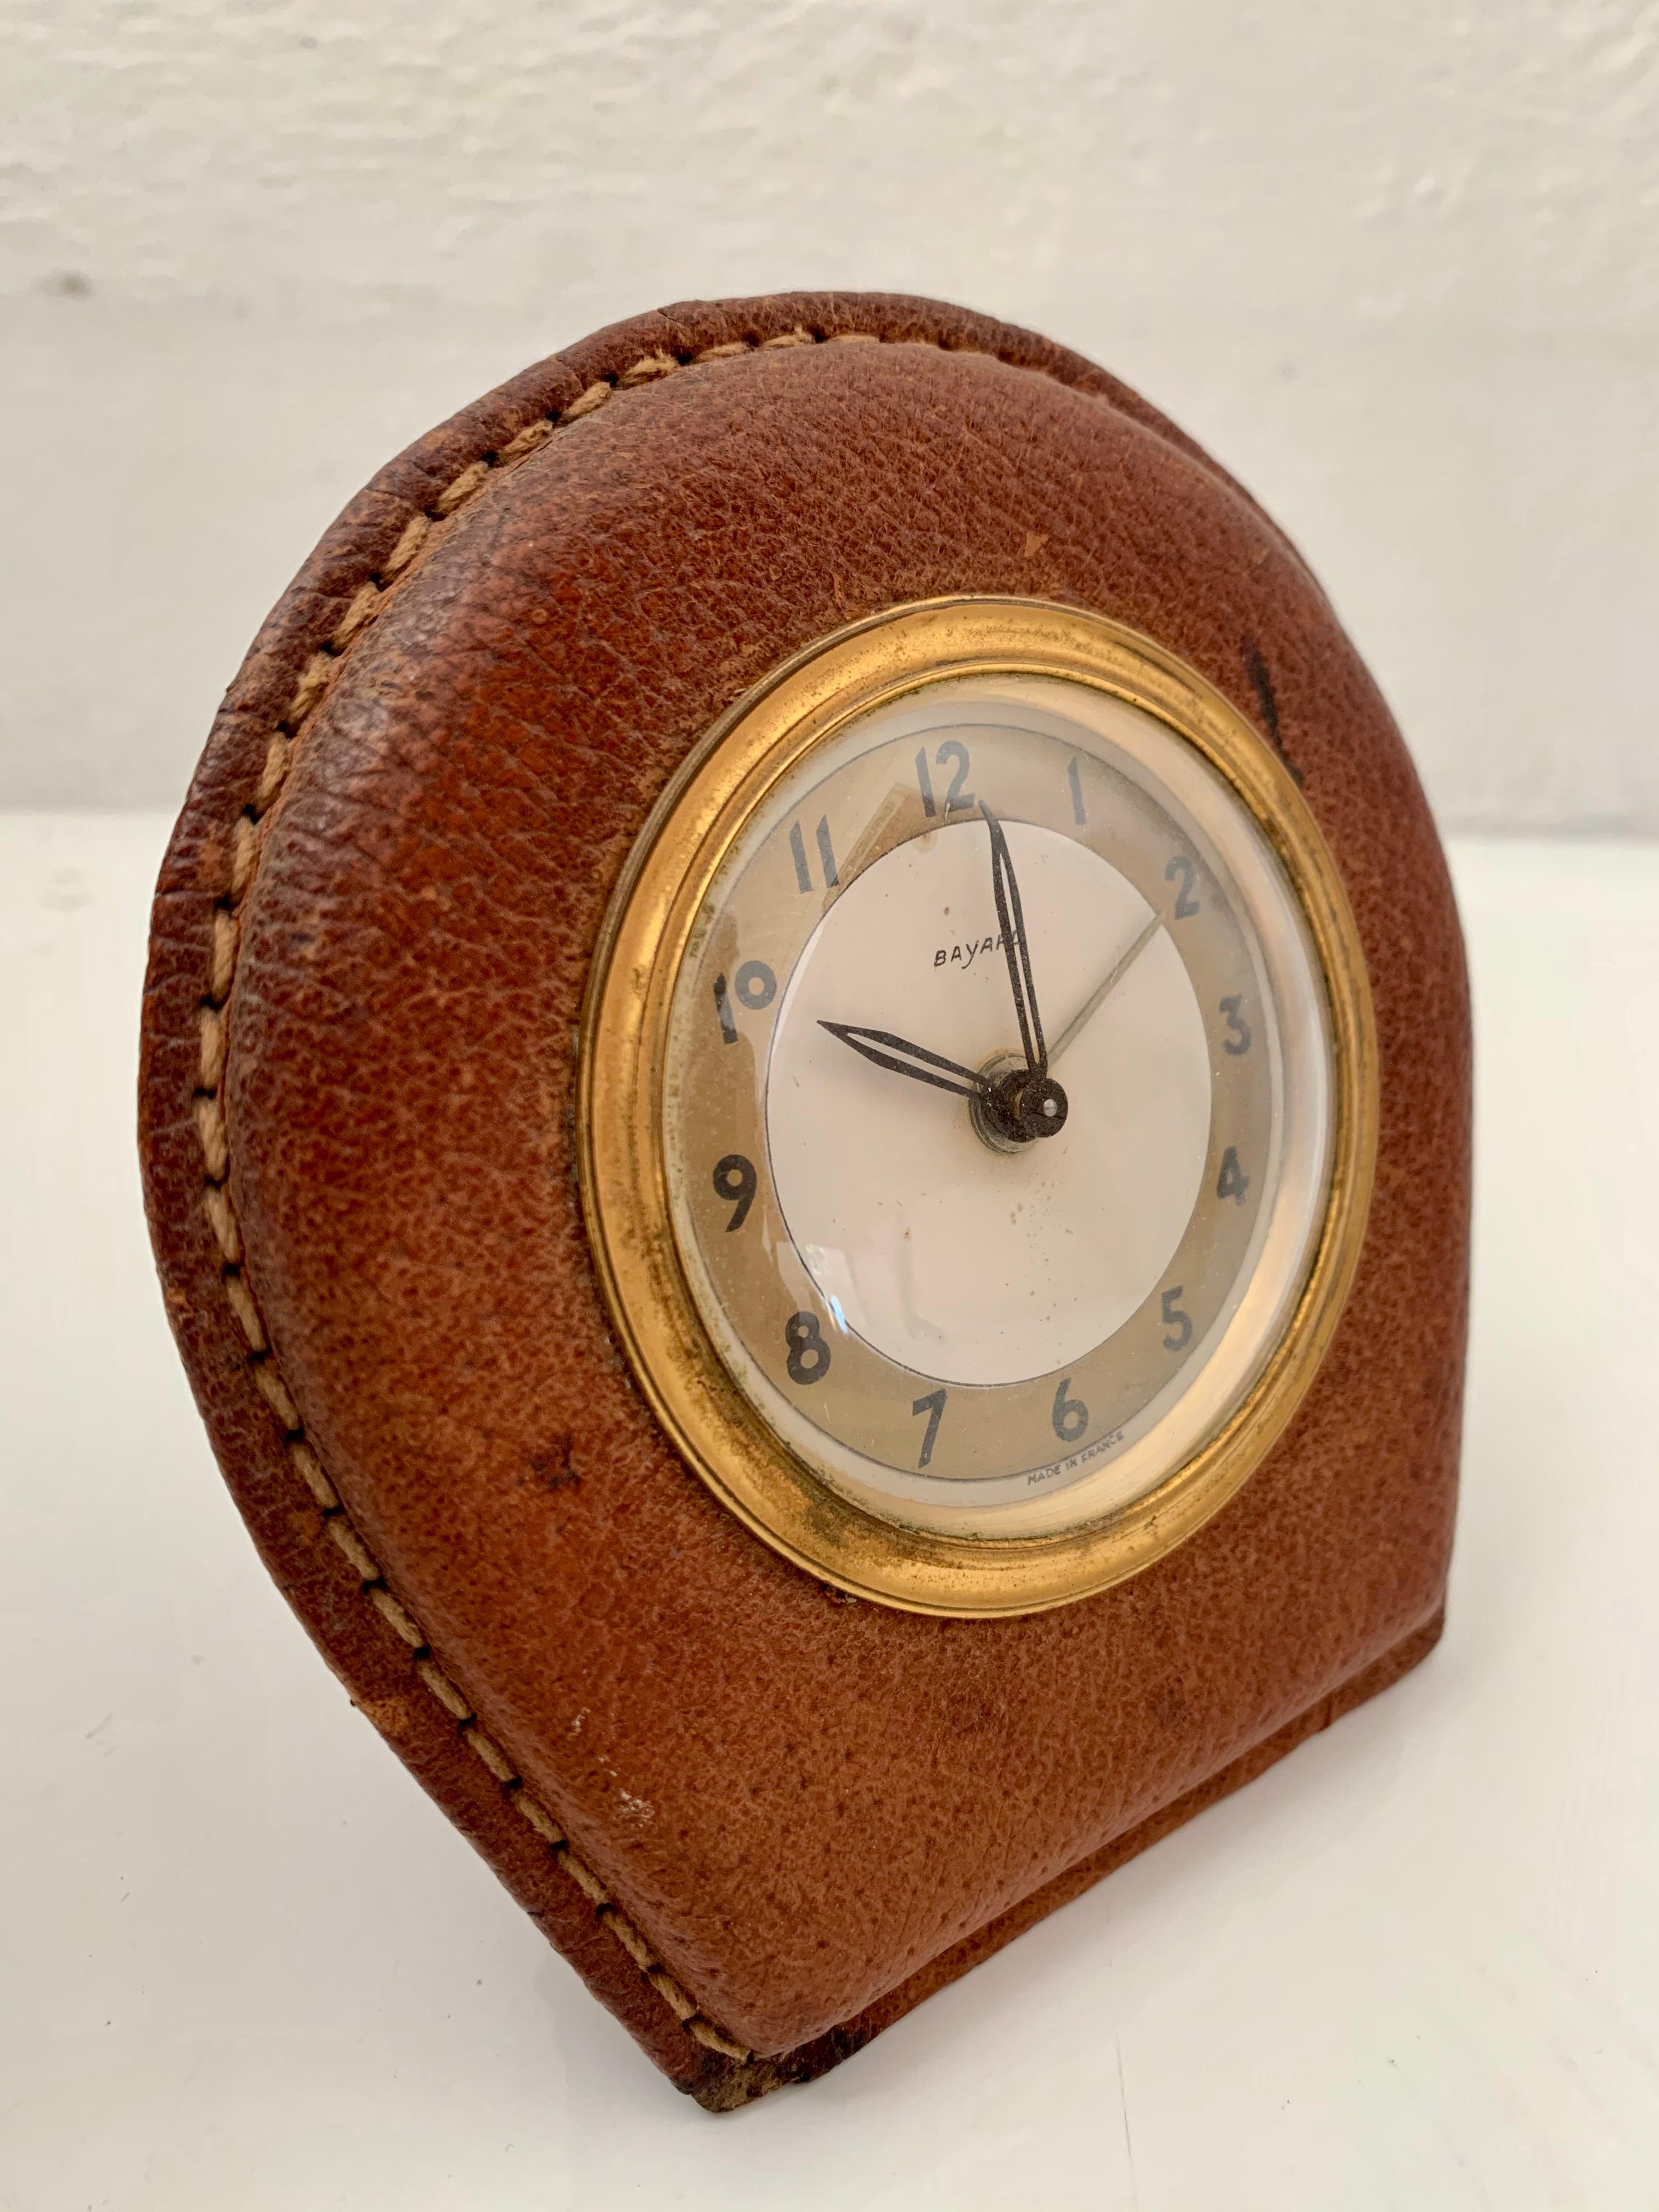 Handsome French saddle leather desk clock by Bayard in the style of Jacques Adnet. Excellent vintage condition. Keeps time and has an alarm. Great patina to brass and leather.